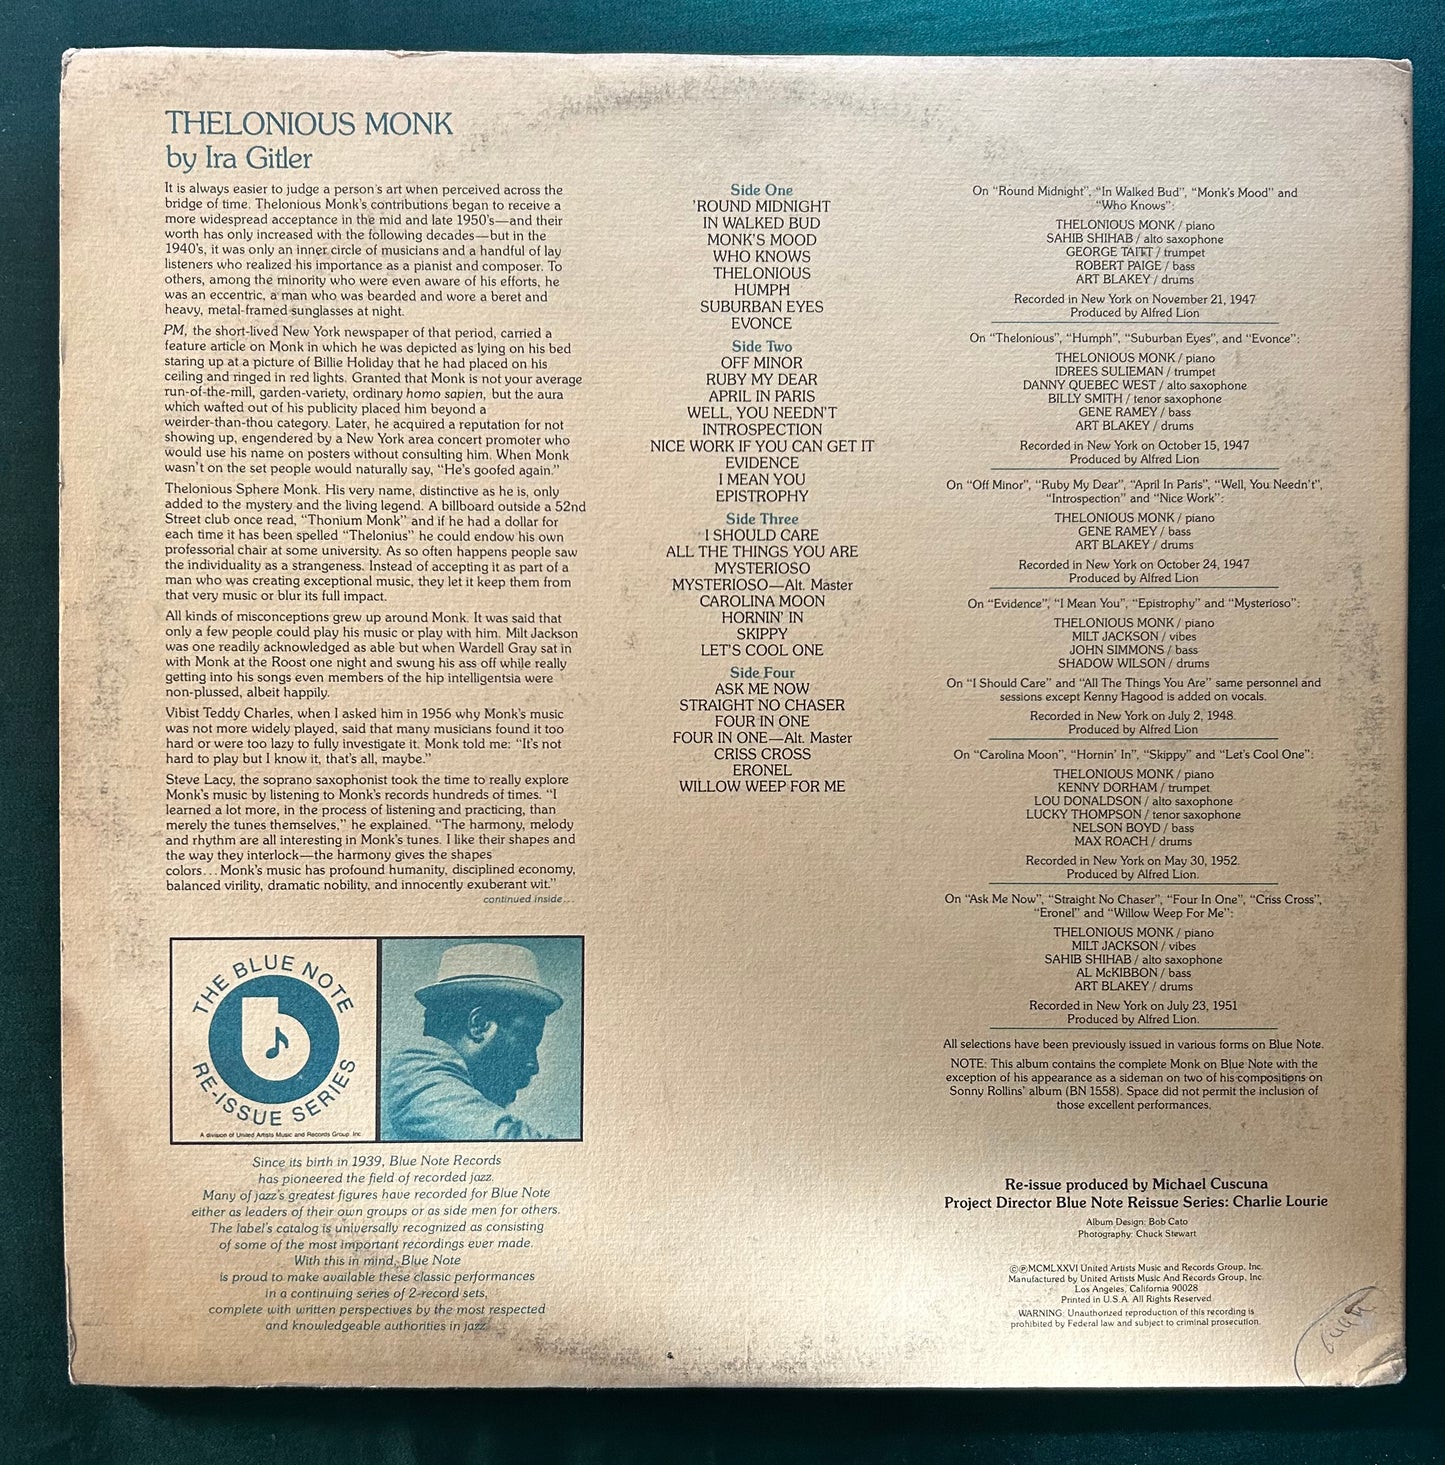 Thelonious Monk - The Complete Genius 1976 Blue Note Re-Issue Series Comp